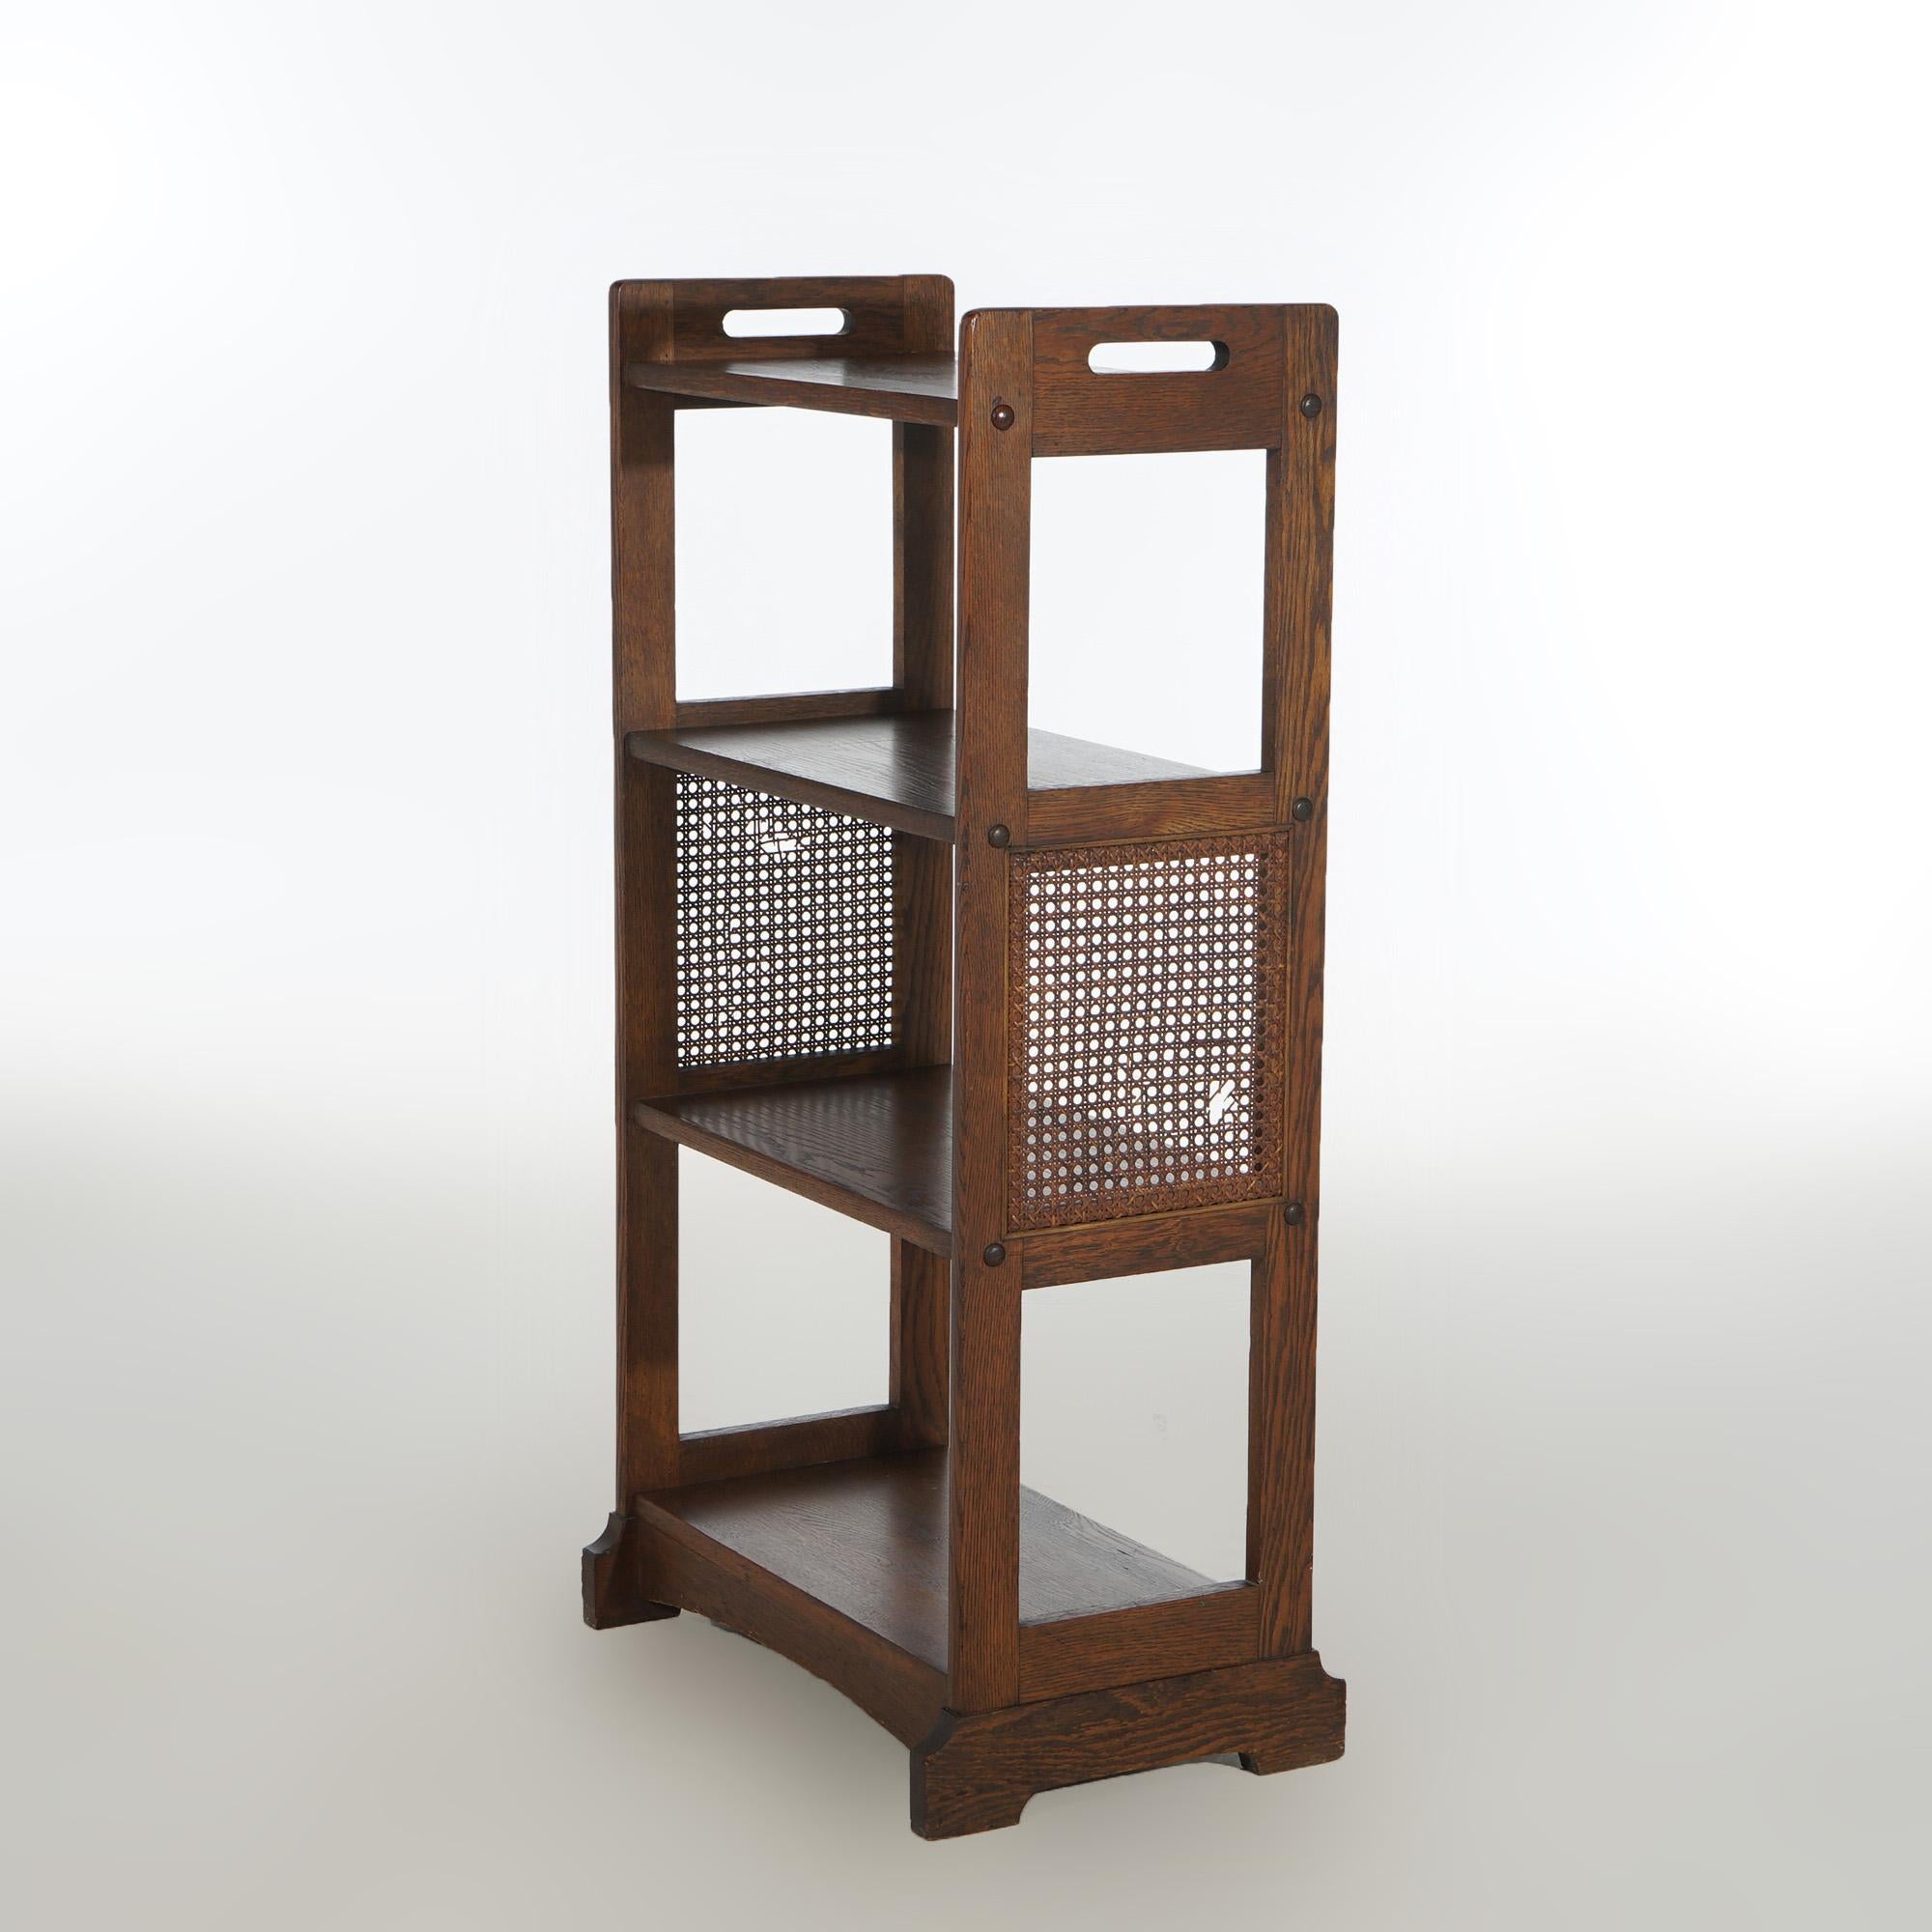 Antique Stickley Brothers Mission Oak Arts & Crafts Book Stand with Cutout Handles and Pressed Cane Sides, C1910

Measures - 42.5